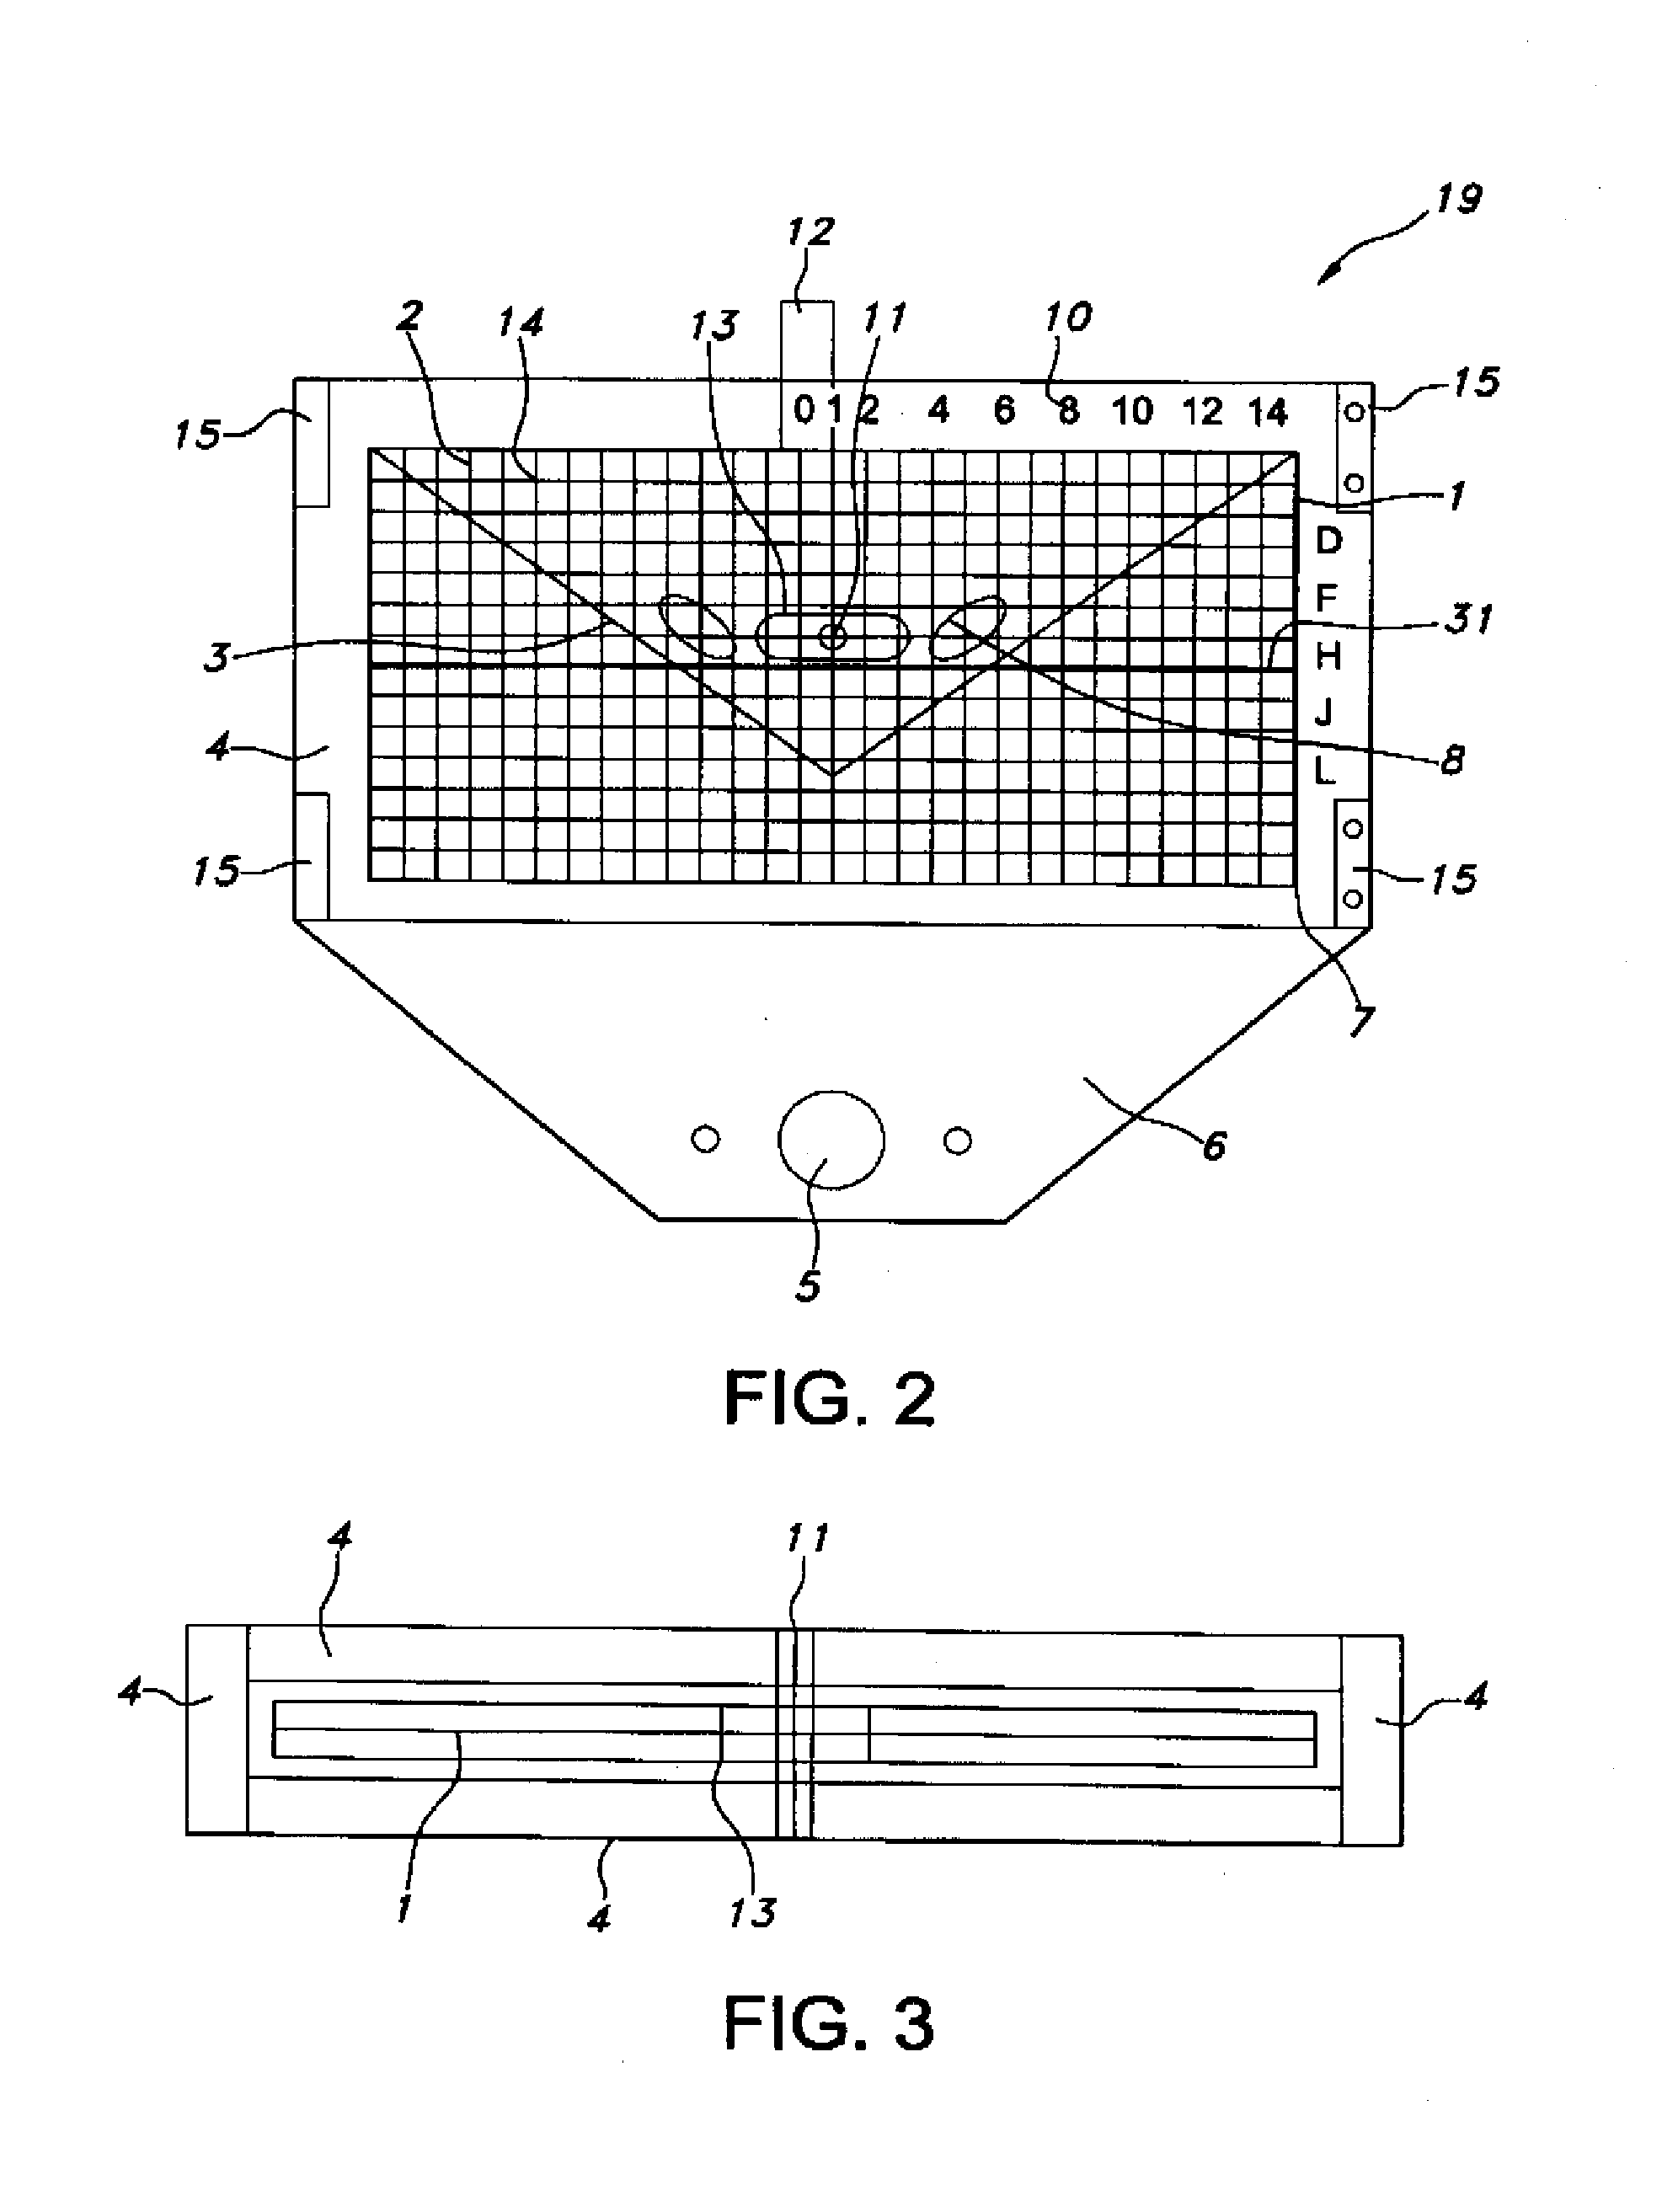 Alignment Plate Apparatus and Method of Use